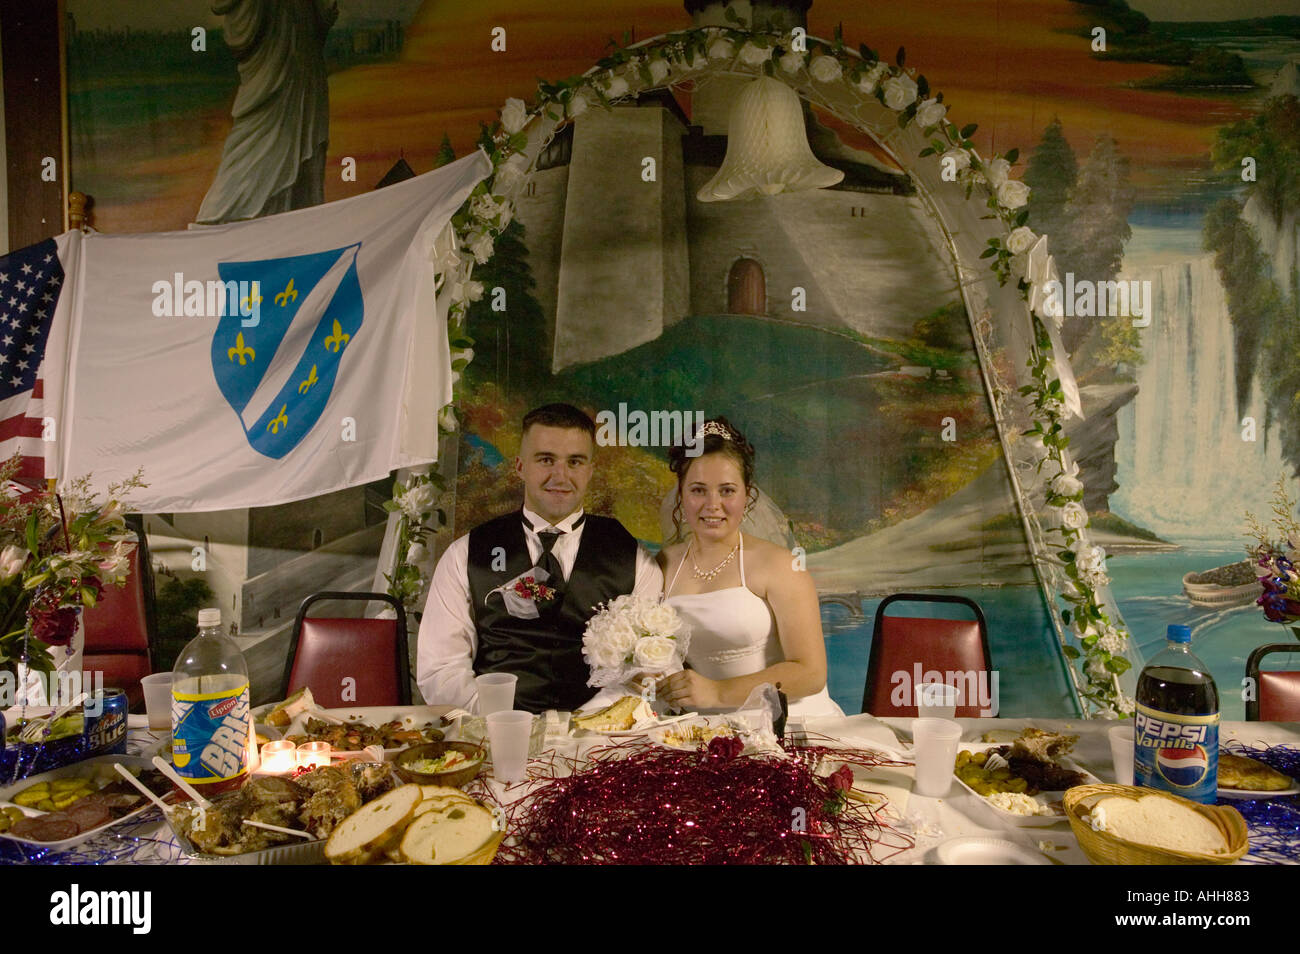 Bride and groom at a traditional Bosnian wedding Utica New York Stock Photo